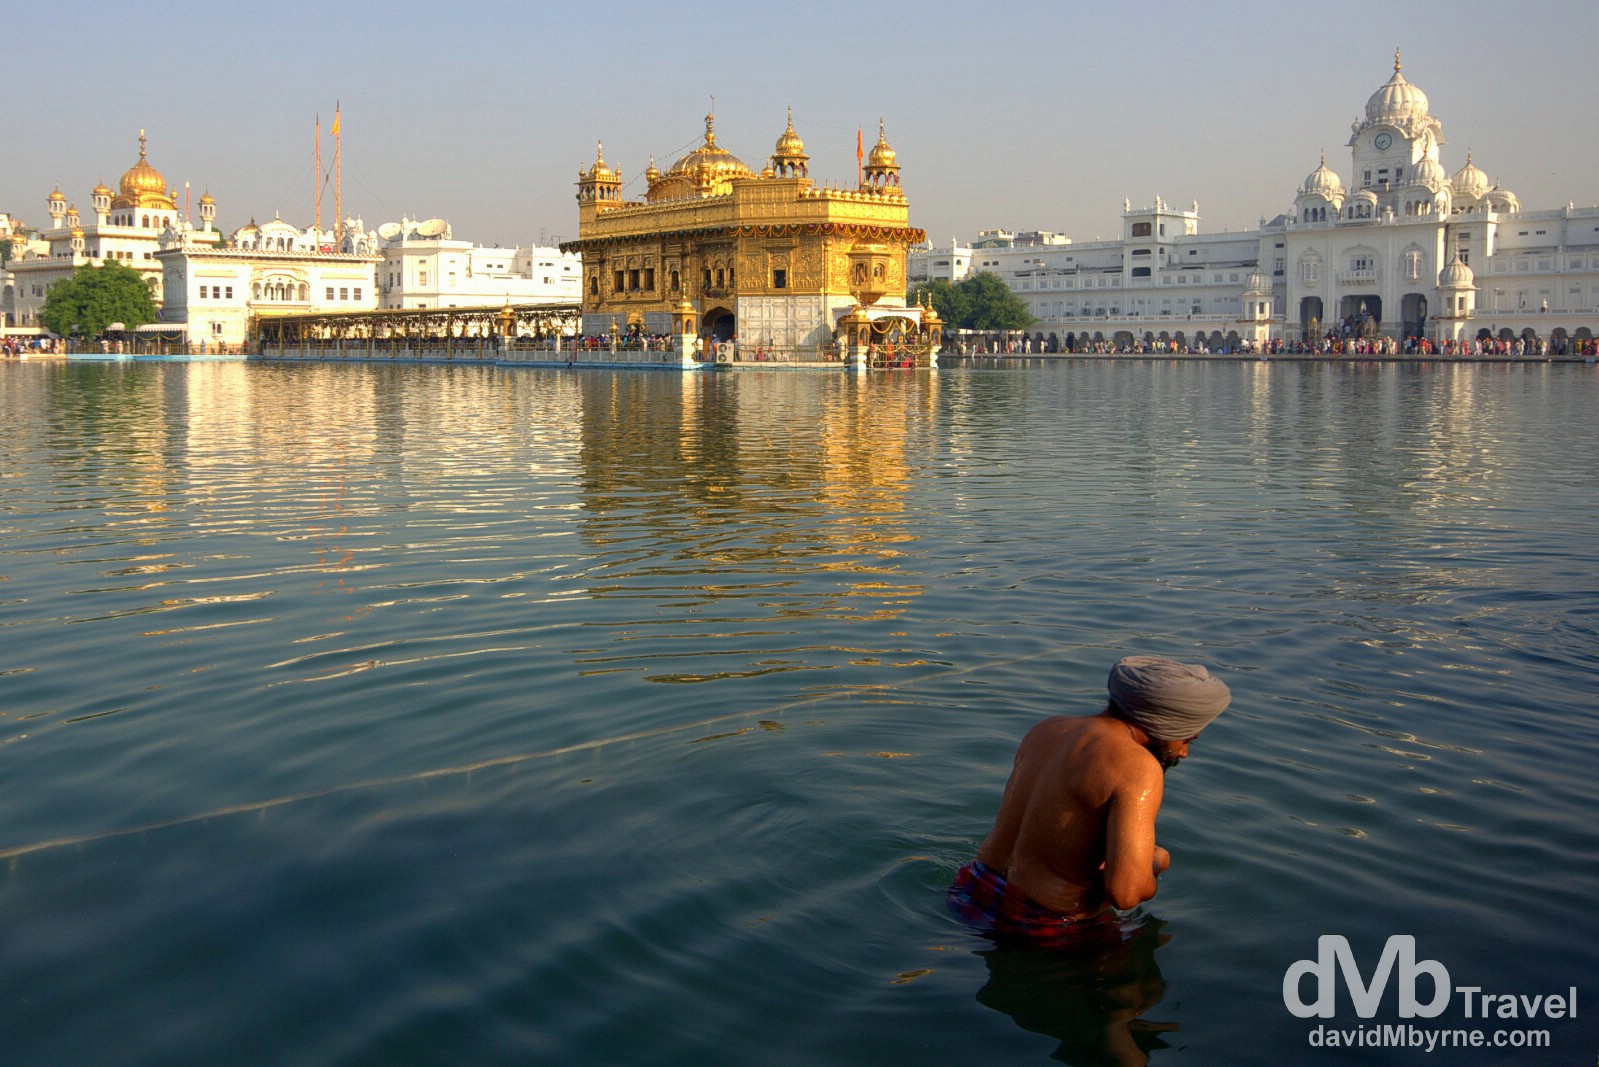 Bathing in the Amrit Sarovar (Pool of Nectar) in the Golden Temple complex, Amritsar, India. October 9th 2012.